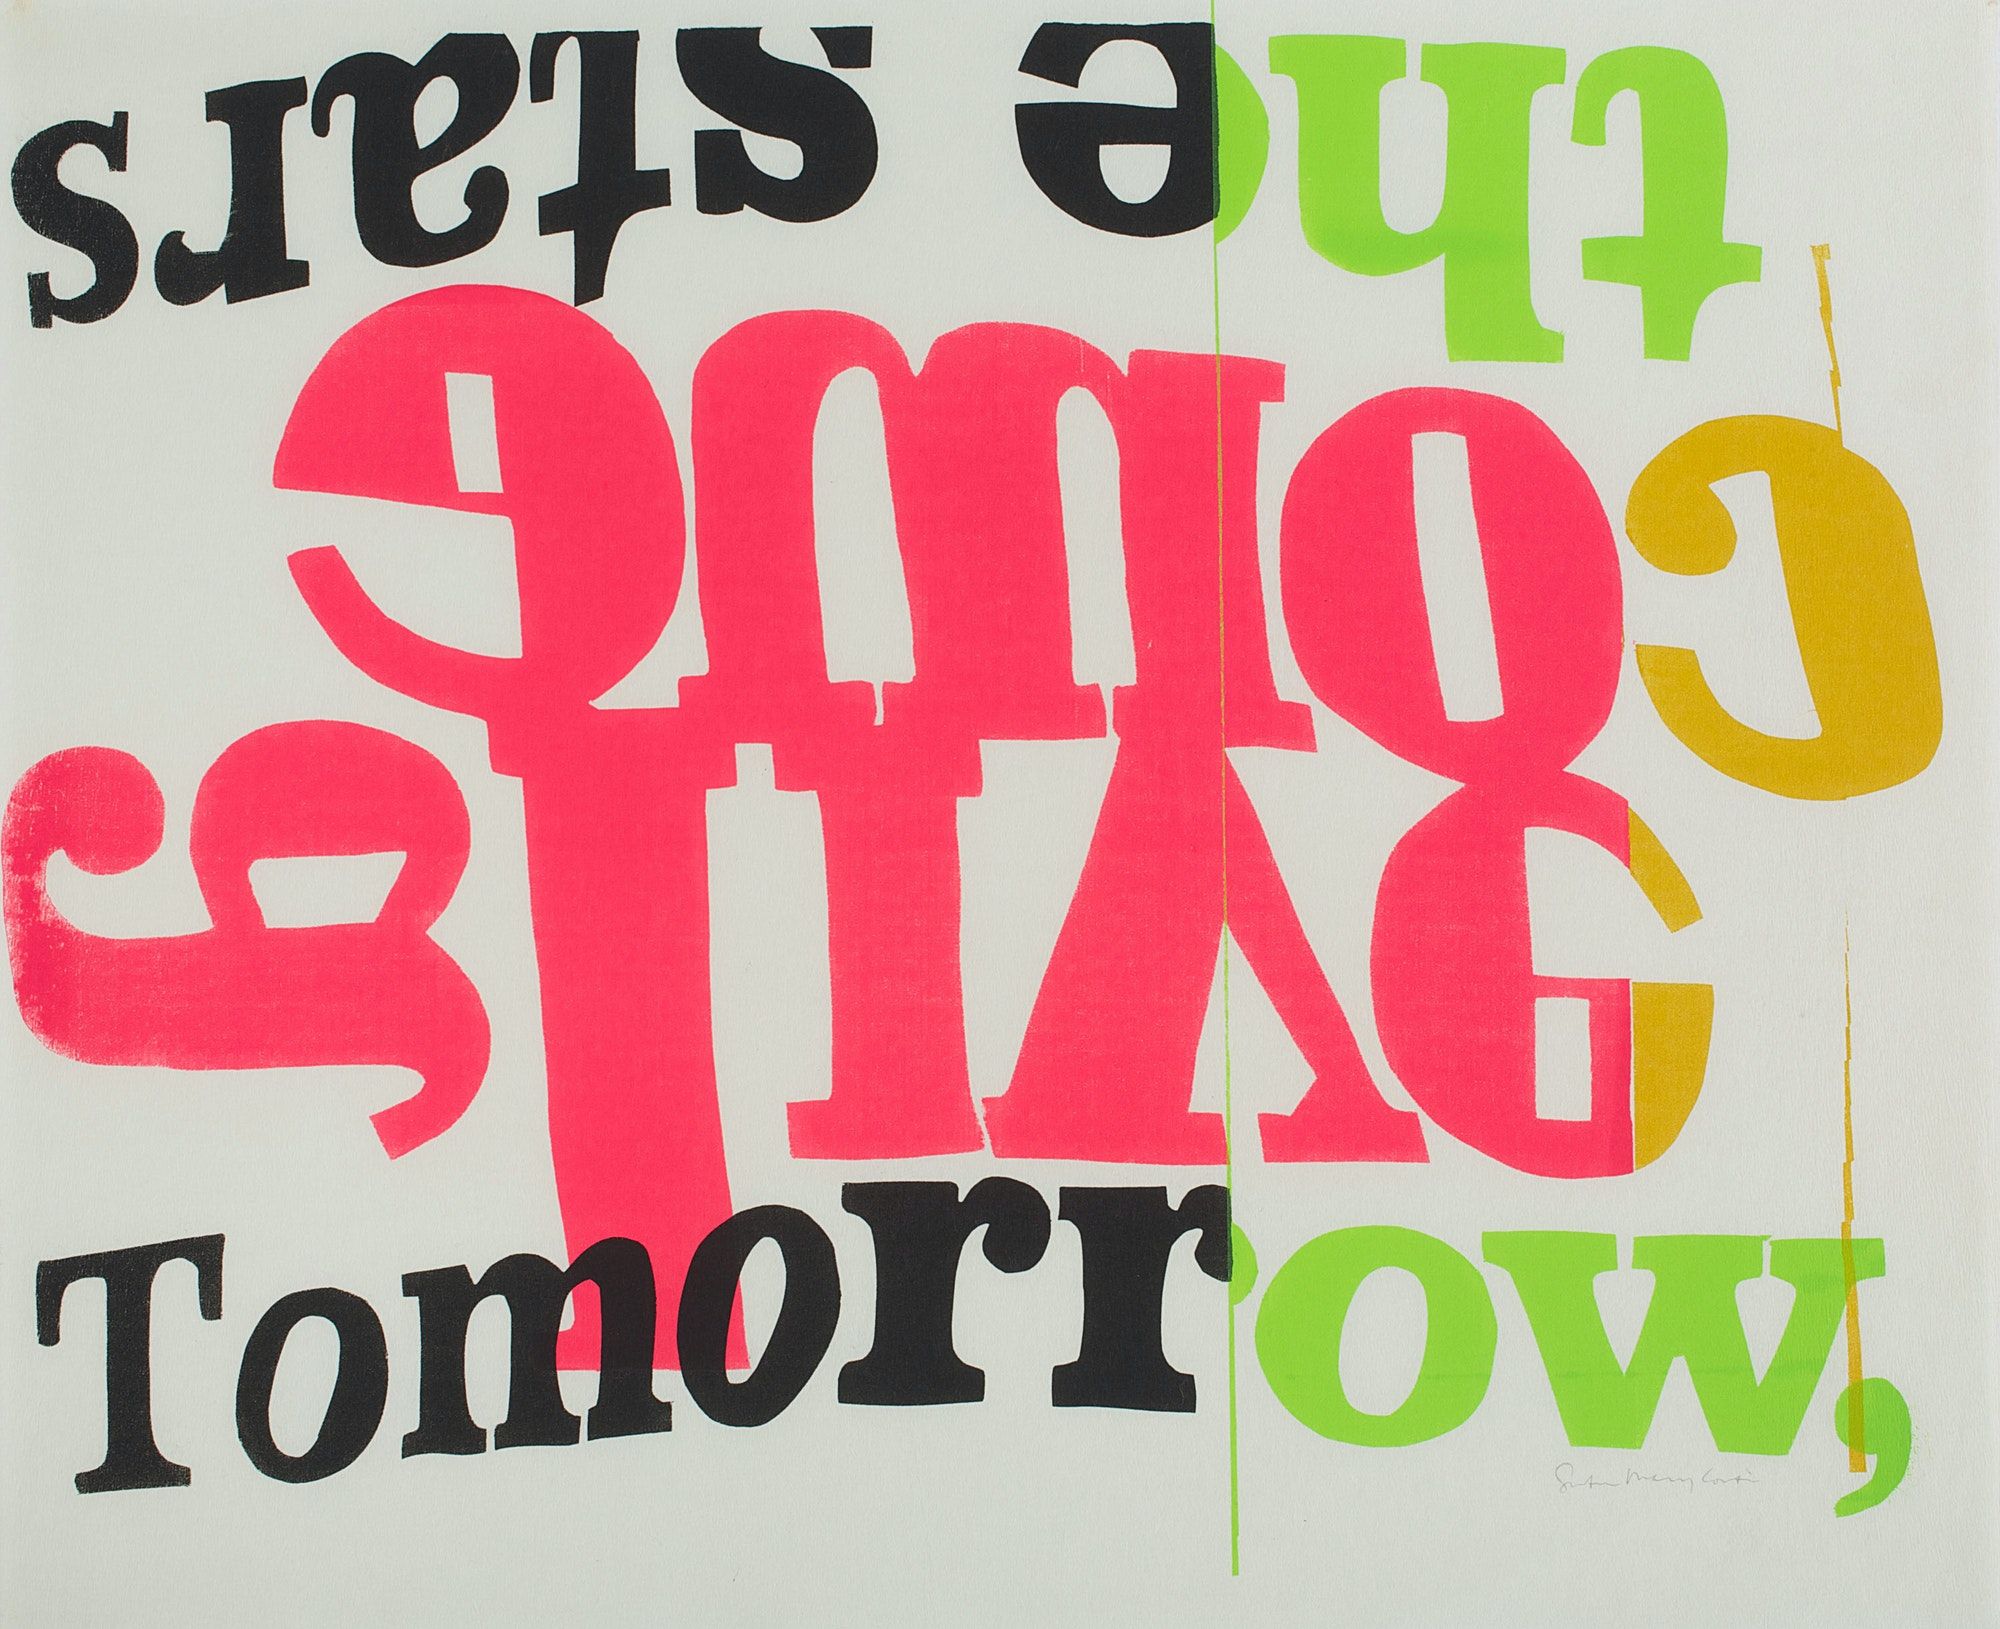 A print of jumbled type in pink, green, black and yellow, reading "Come alive - tomorrow the stars"